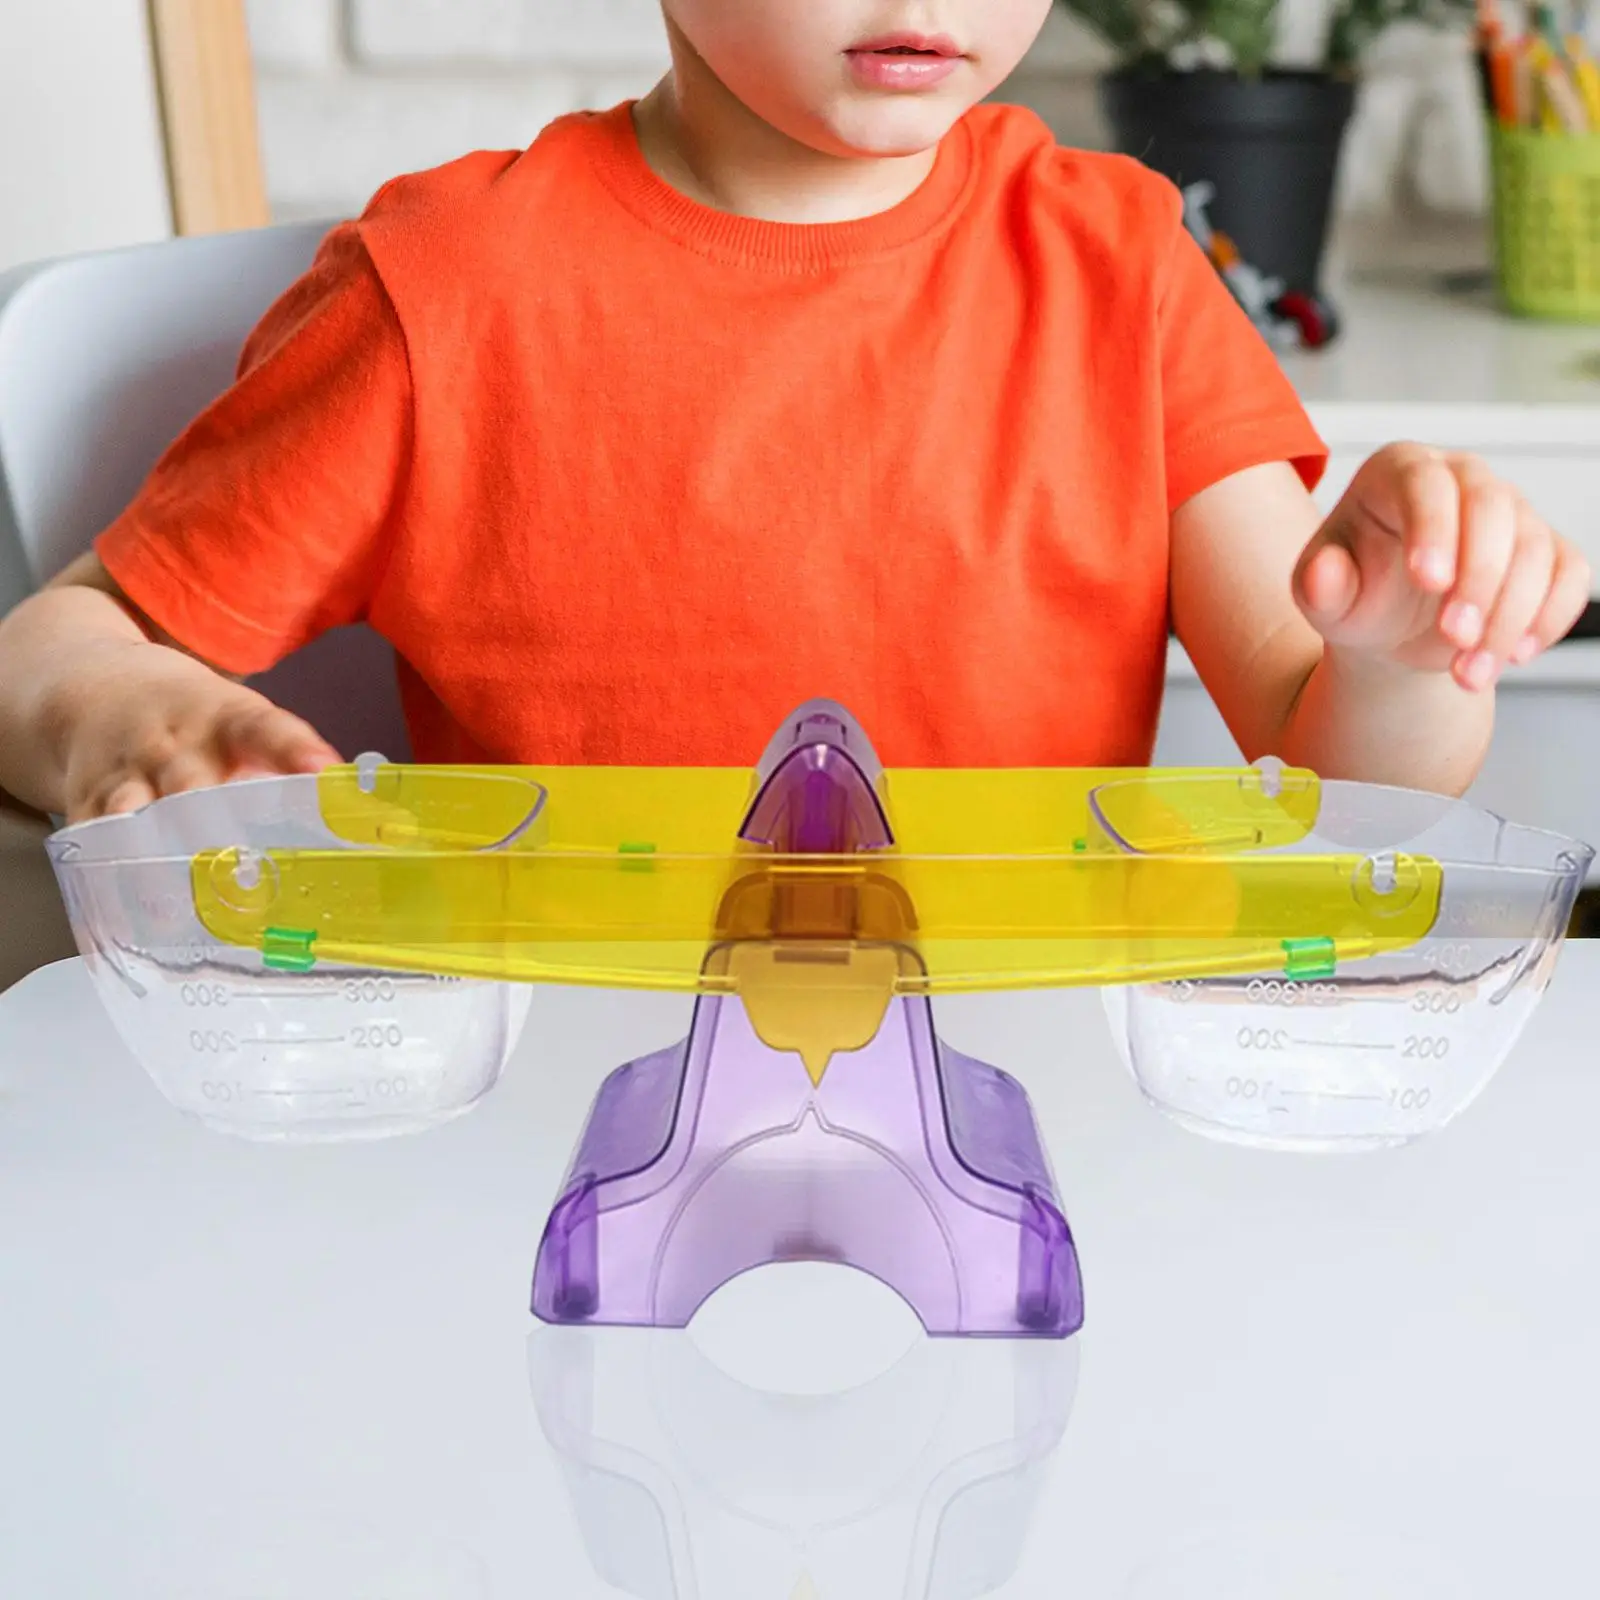 Kids Scale Learning Solids and Liquids Multipurpose Teaching Aids Bucket Balance for Adding Inequalities Weight Height Volume